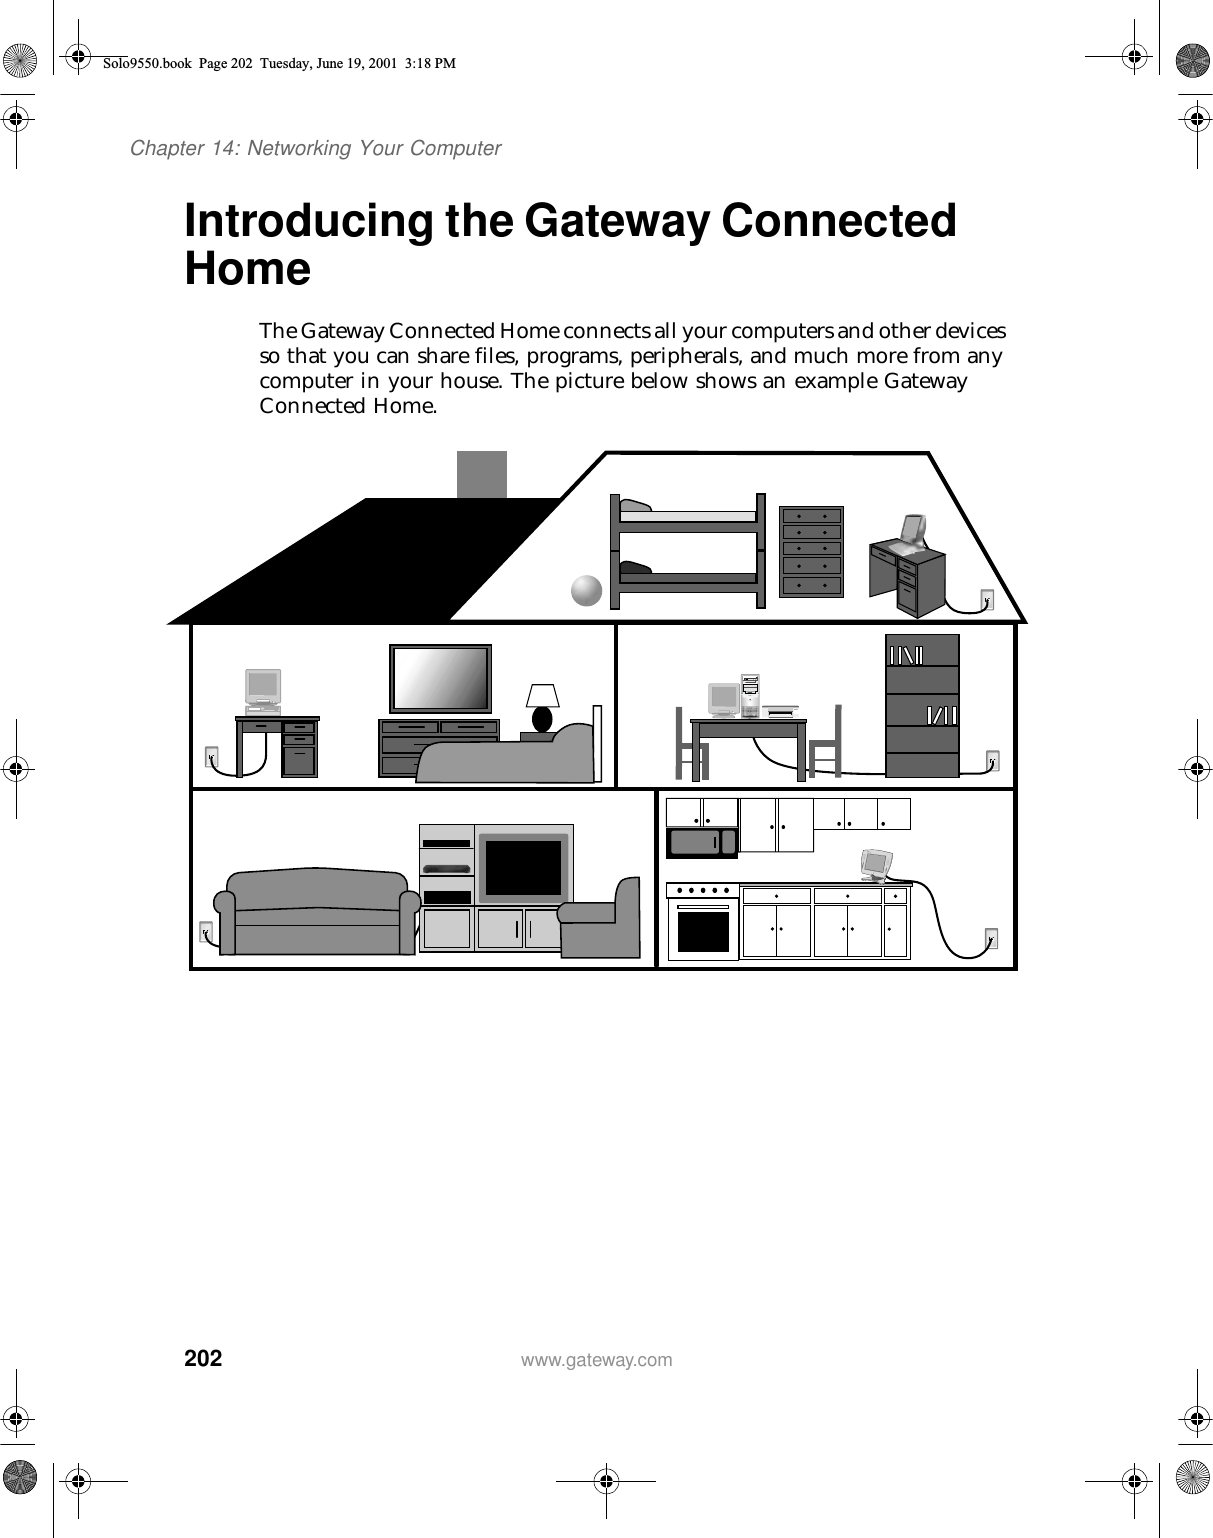 202Chapter 14: Networking Your Computerwww.gateway.comIntroducing the Gateway Connected HomeThe Gateway Connected Home connects all your computers and other devices so that you can share files, programs, peripherals, and much more from any computer in your house. The picture below shows an example Gateway Connected Home.Solo9550.book Page 202 Tuesday, June 19, 2001 3:18 PM